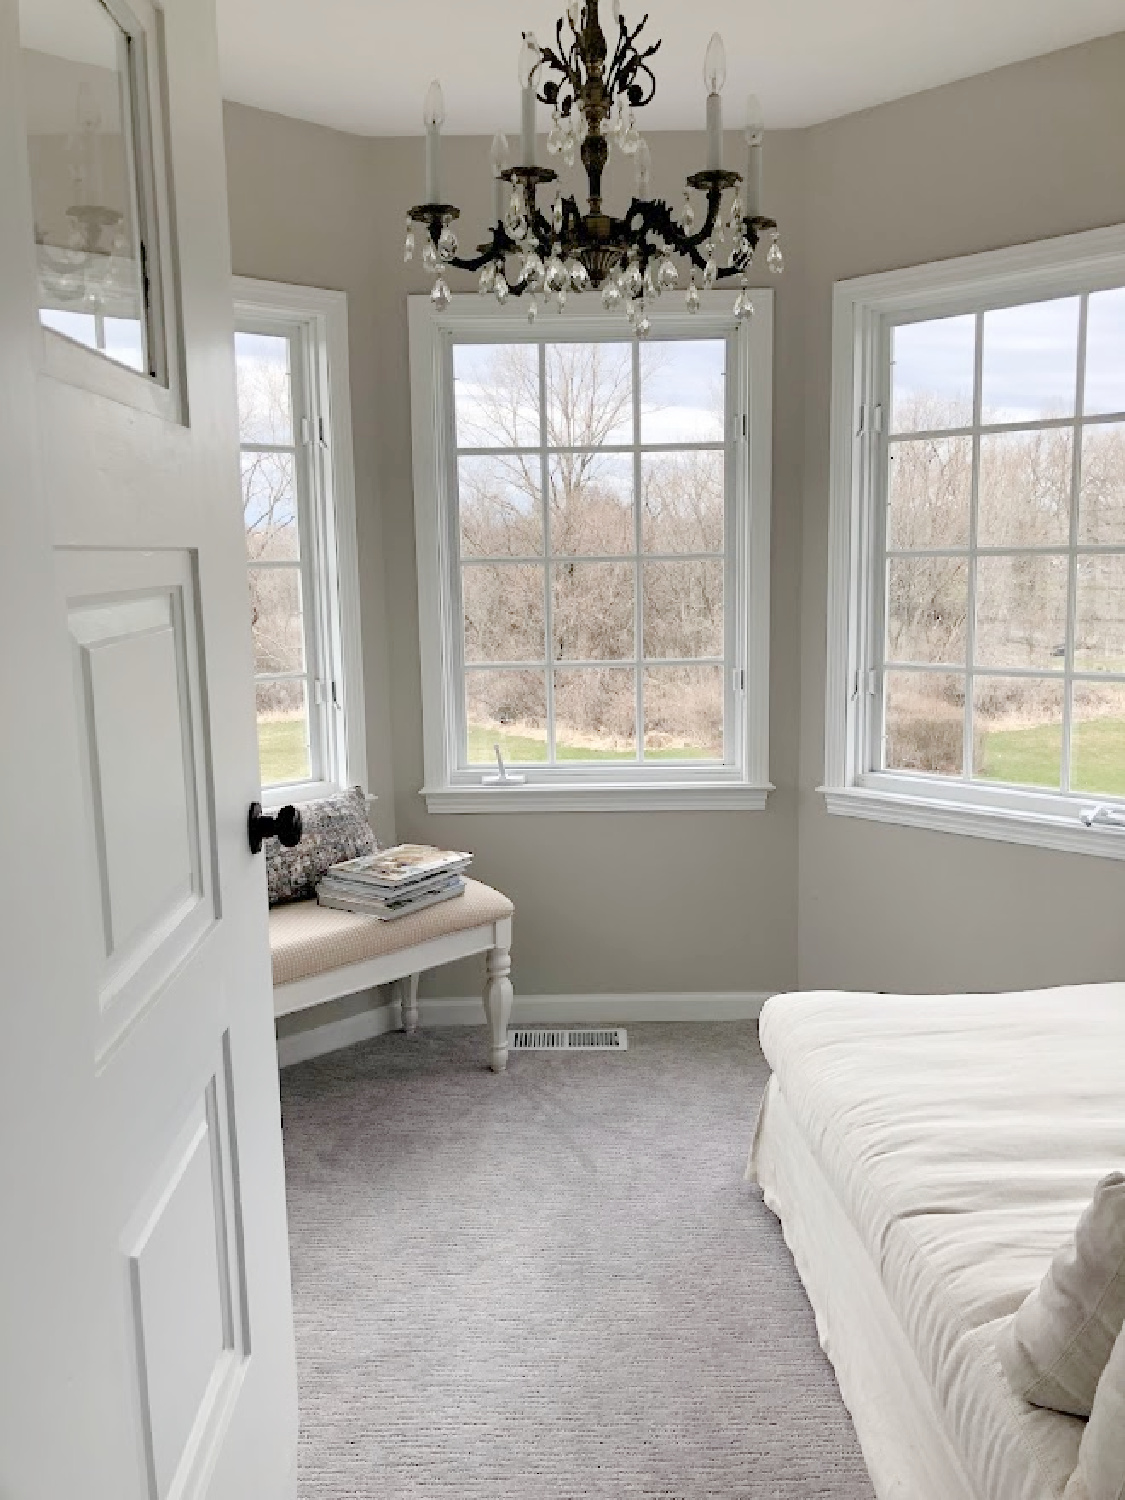 Vintage exterior door open to turret sitting room with linen chaise and bench in coastal bedroom remodel (SW Agreeable Gray on walls) at the Georgian - Hello Lovely Studio. #agreeablegray #swagreeablegray